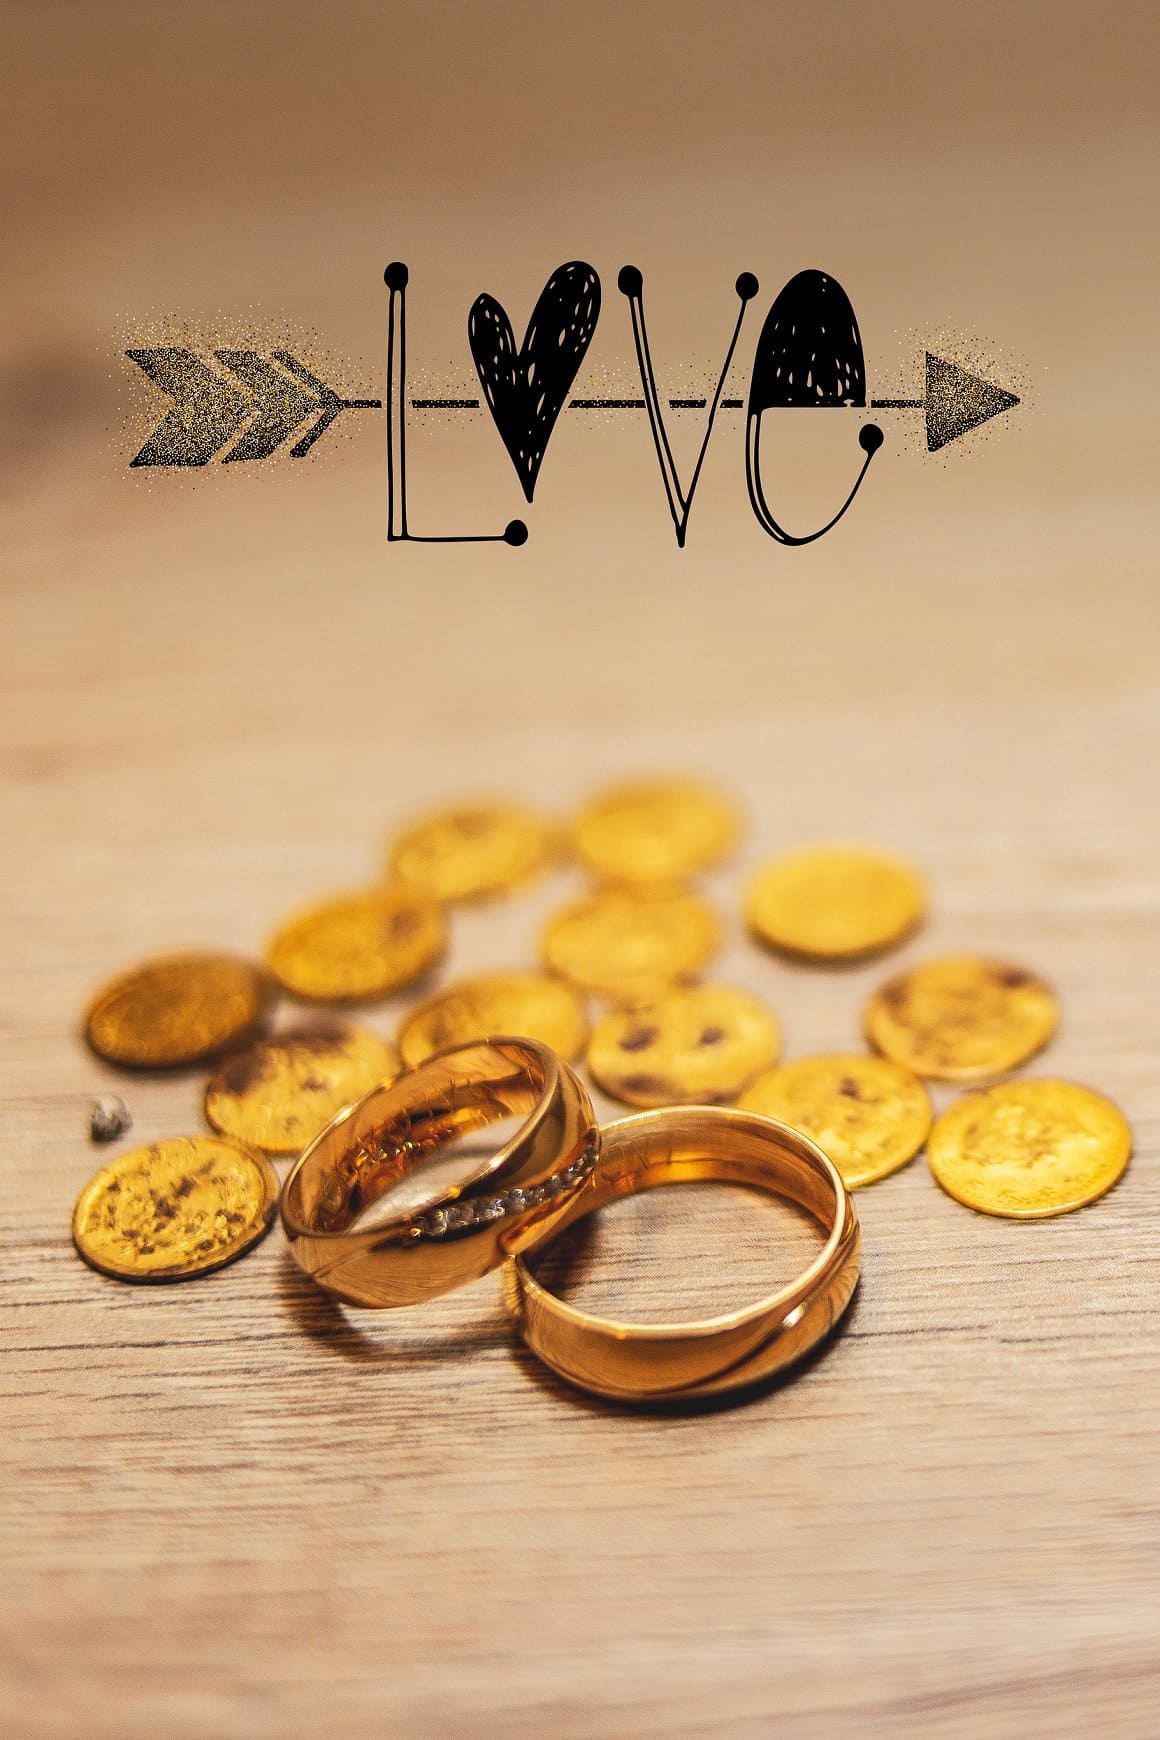 Gold wedding rings and money are on the bottom, and the word "Love" is written on top.